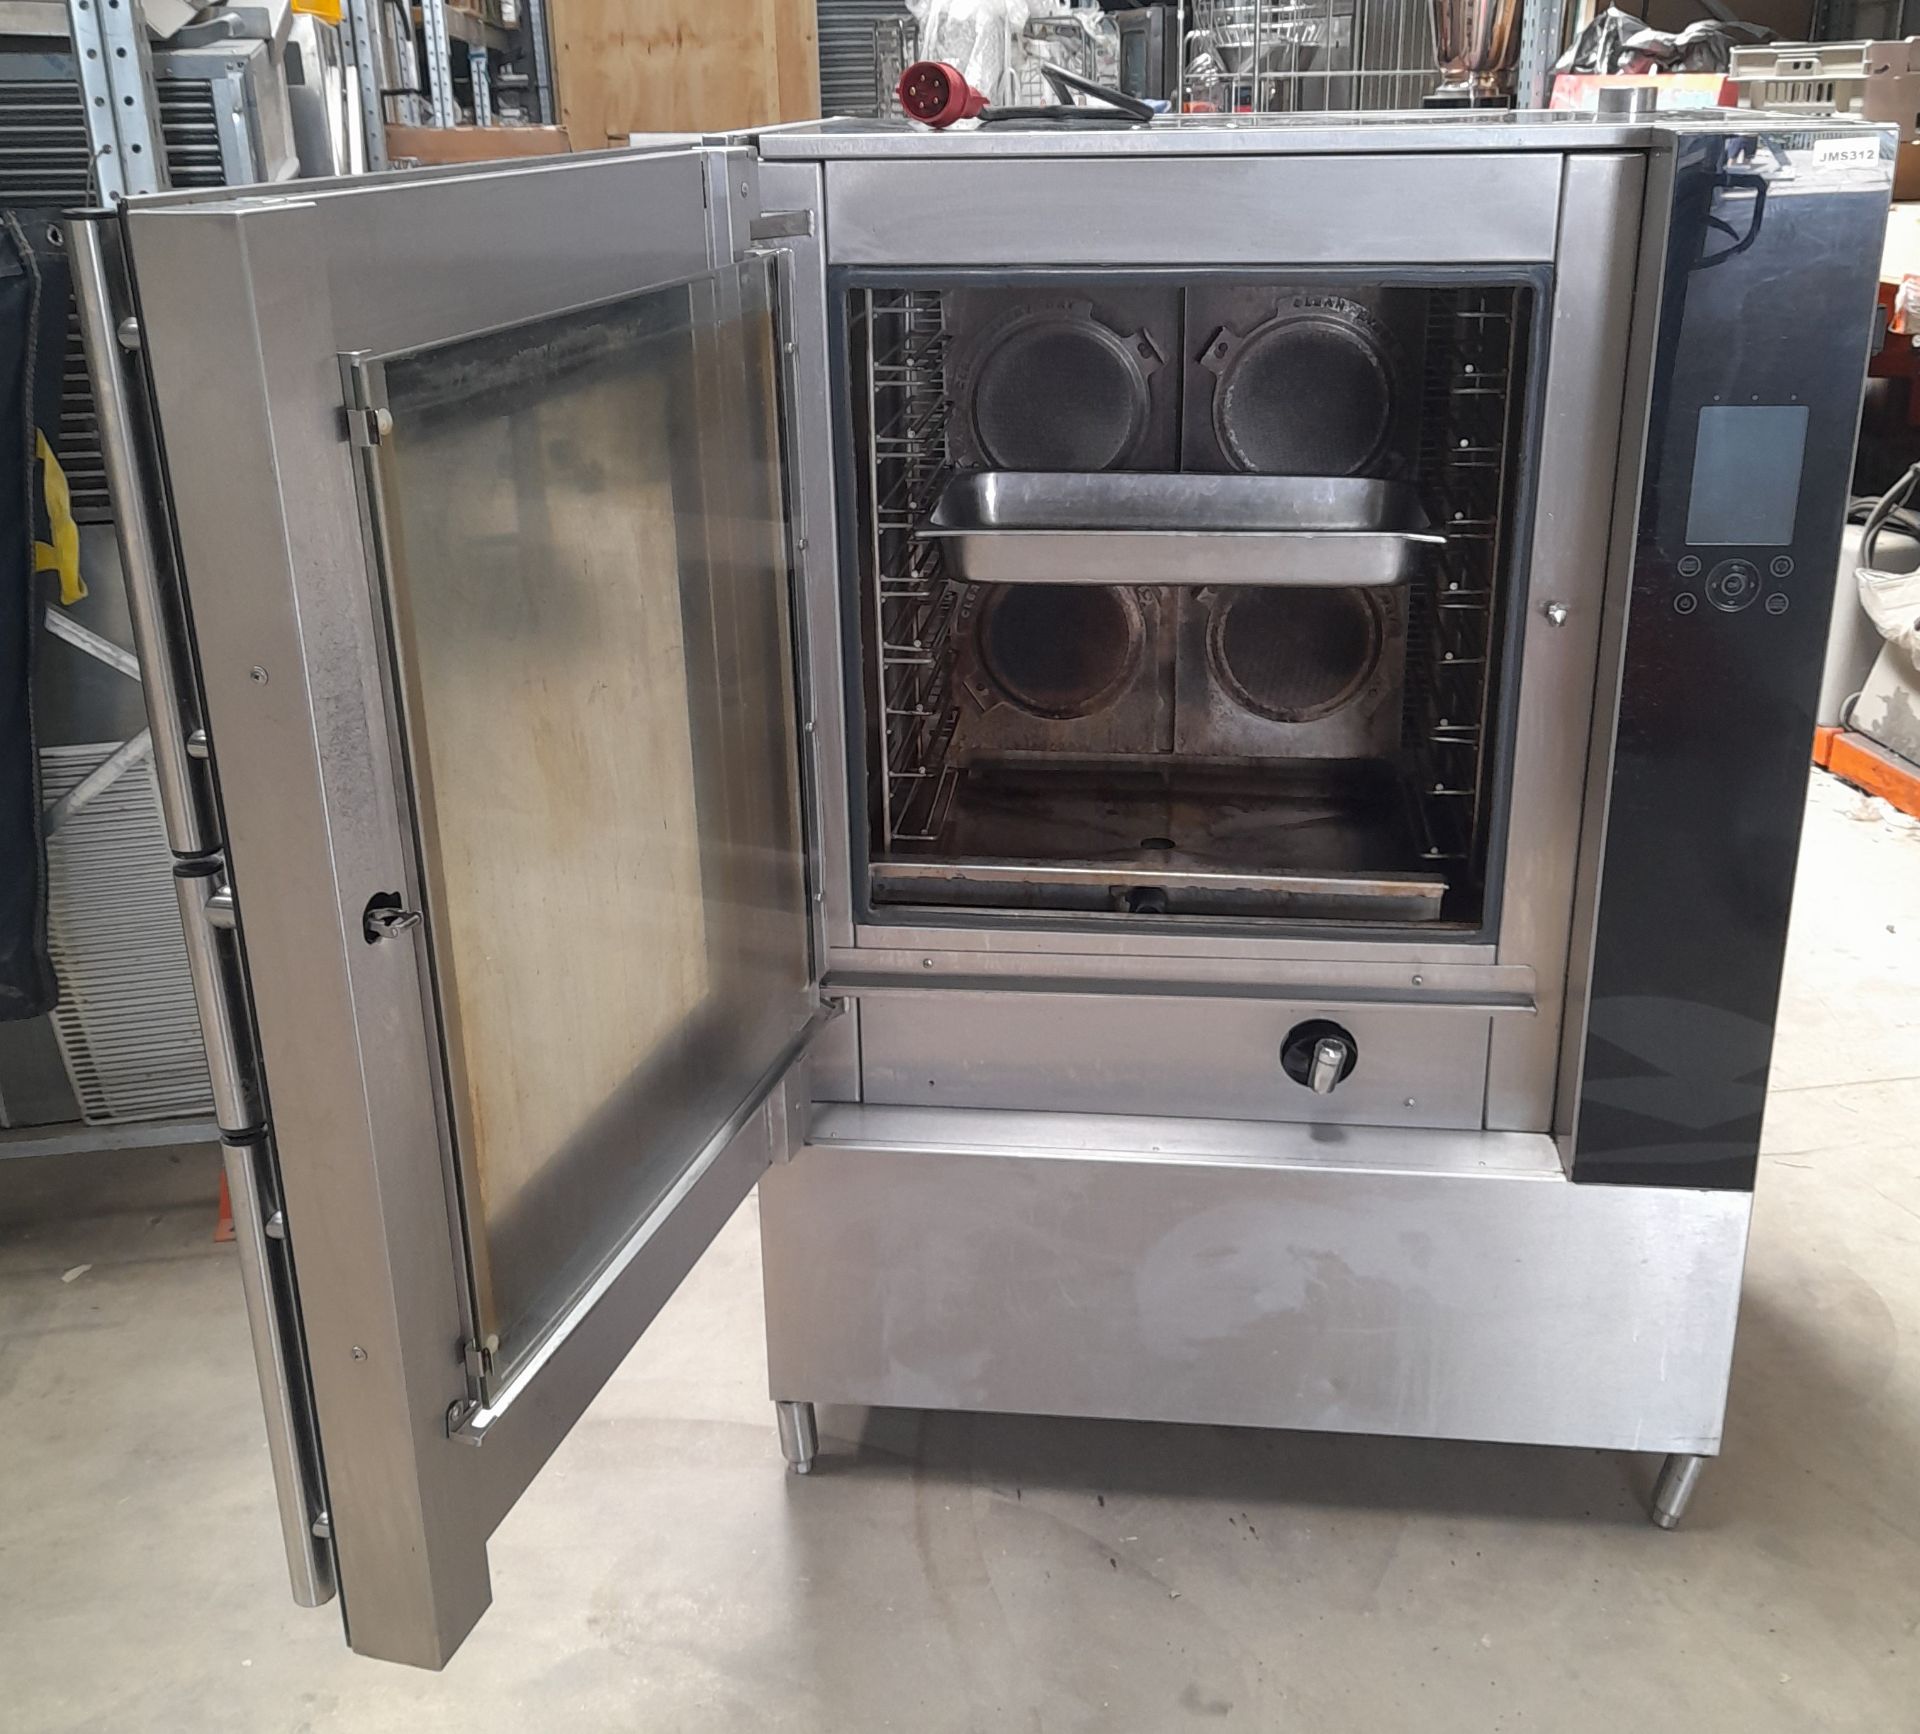 1 x Fri-Jado Turbo Retail 8 Grid Combi Oven - 3 Phase Combi Oven With Various Cooking Programs - Image 2 of 24